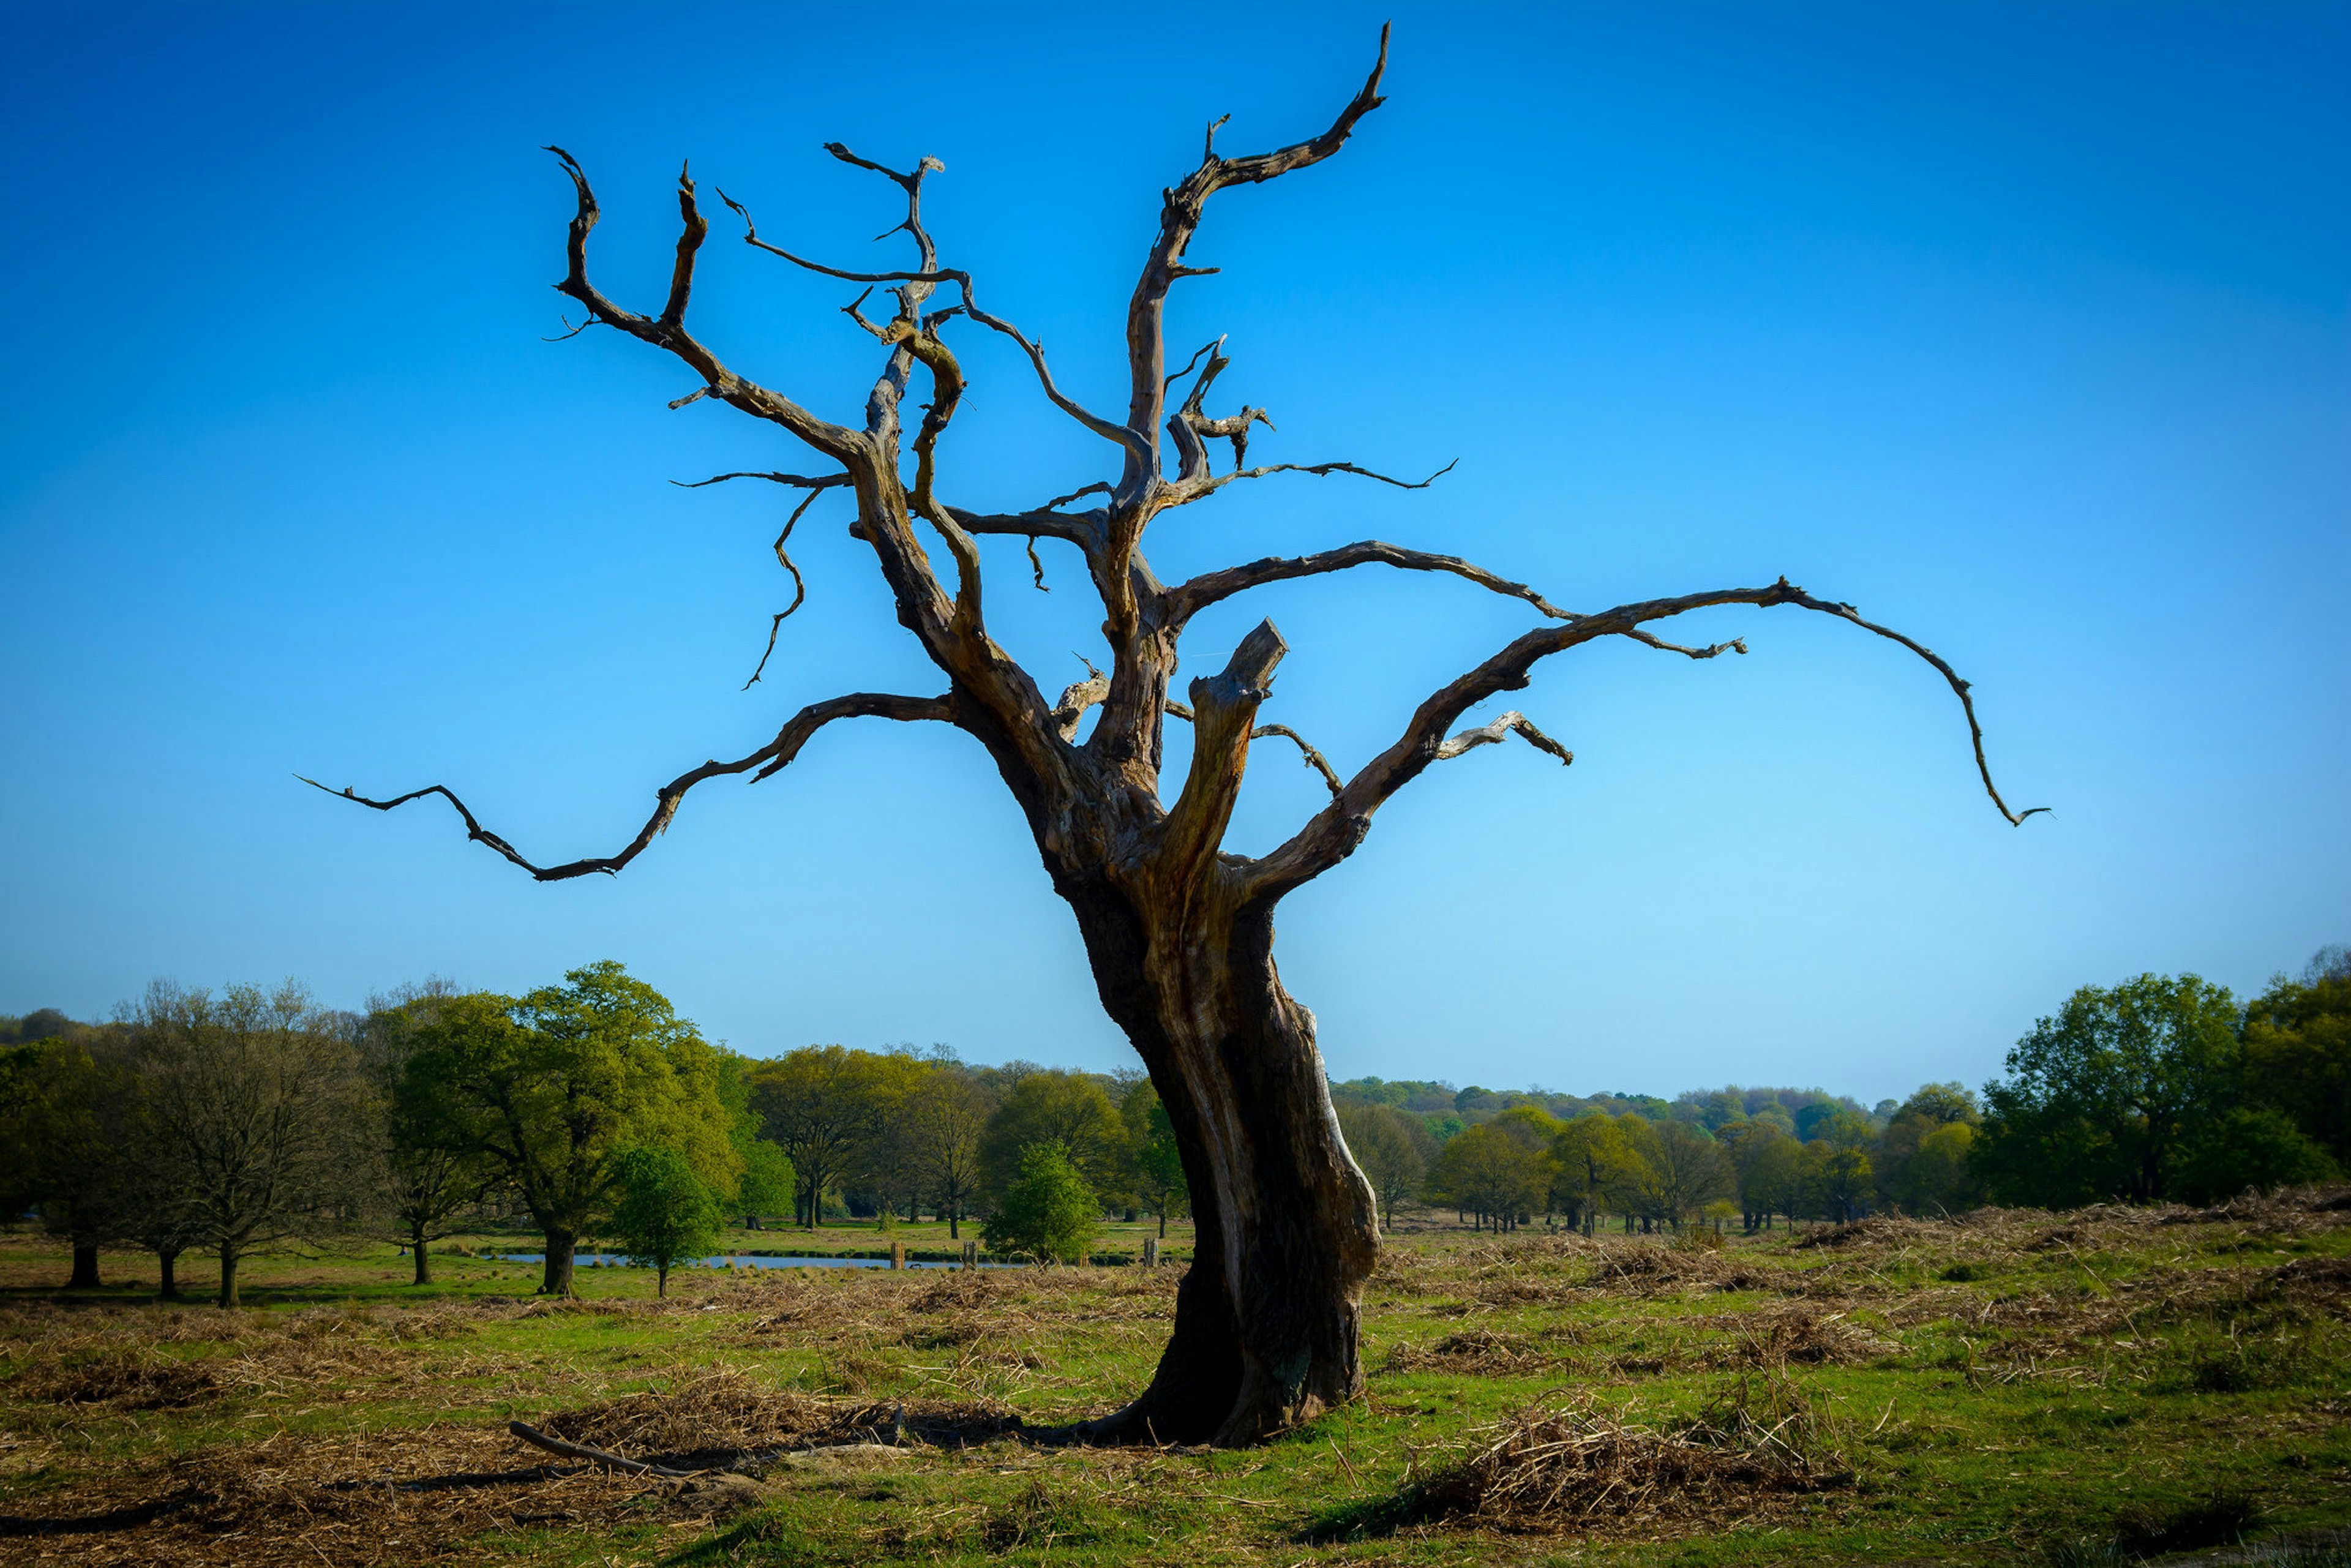 Richmond Park is a popular place for a walk. Image by Rowan Gillette- Fussell / CC BY 2.0